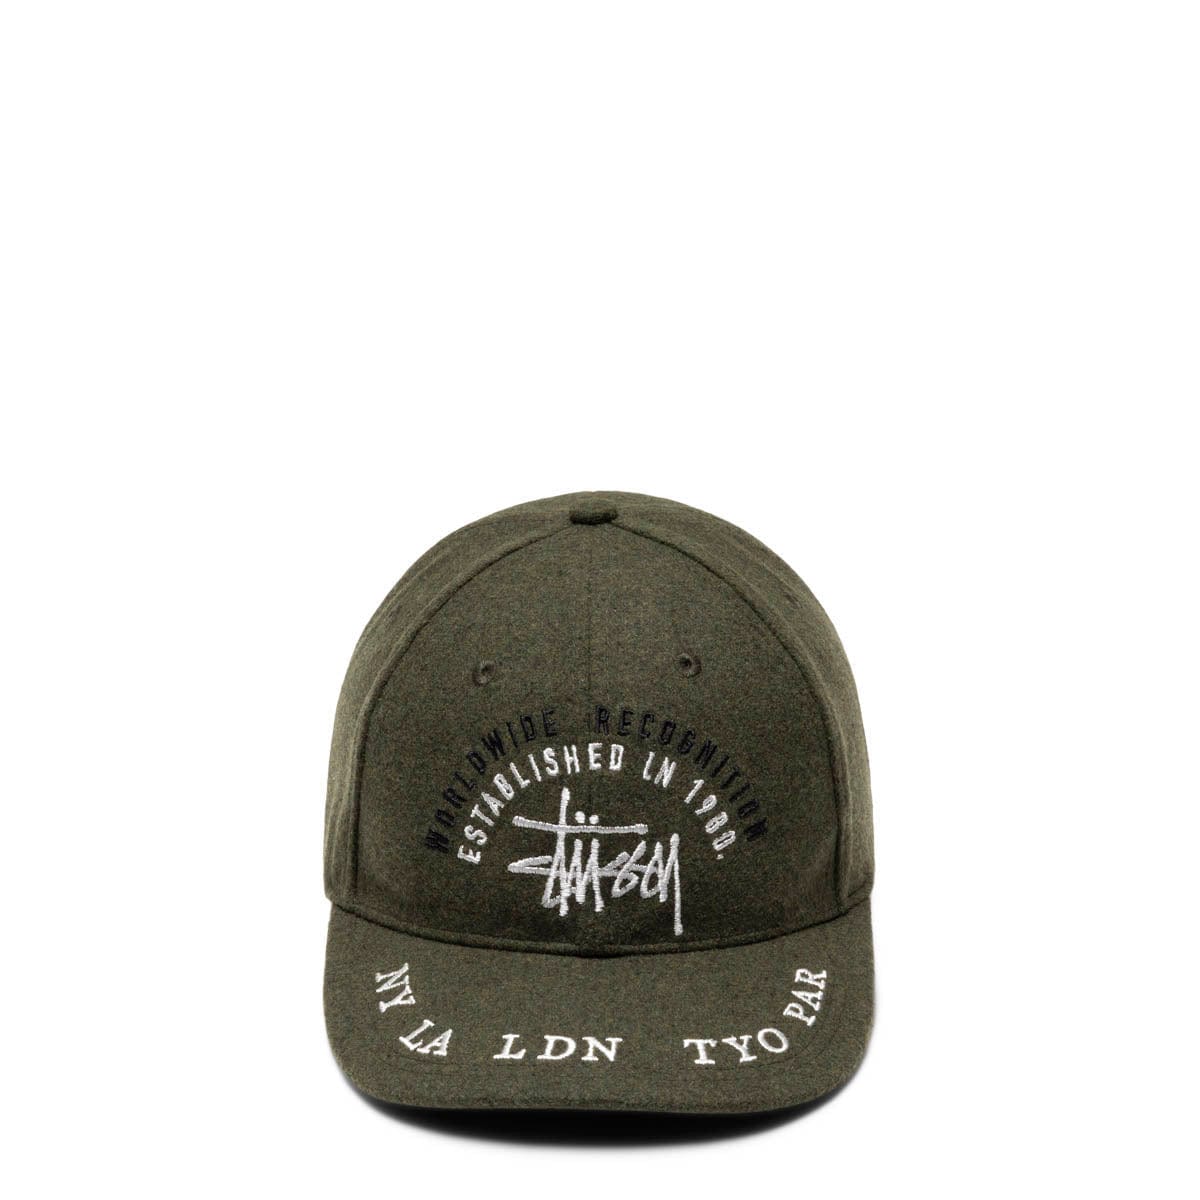 WORLDWIDE LOW PRO CAP FOREST   supreme inset logo grey camp cap